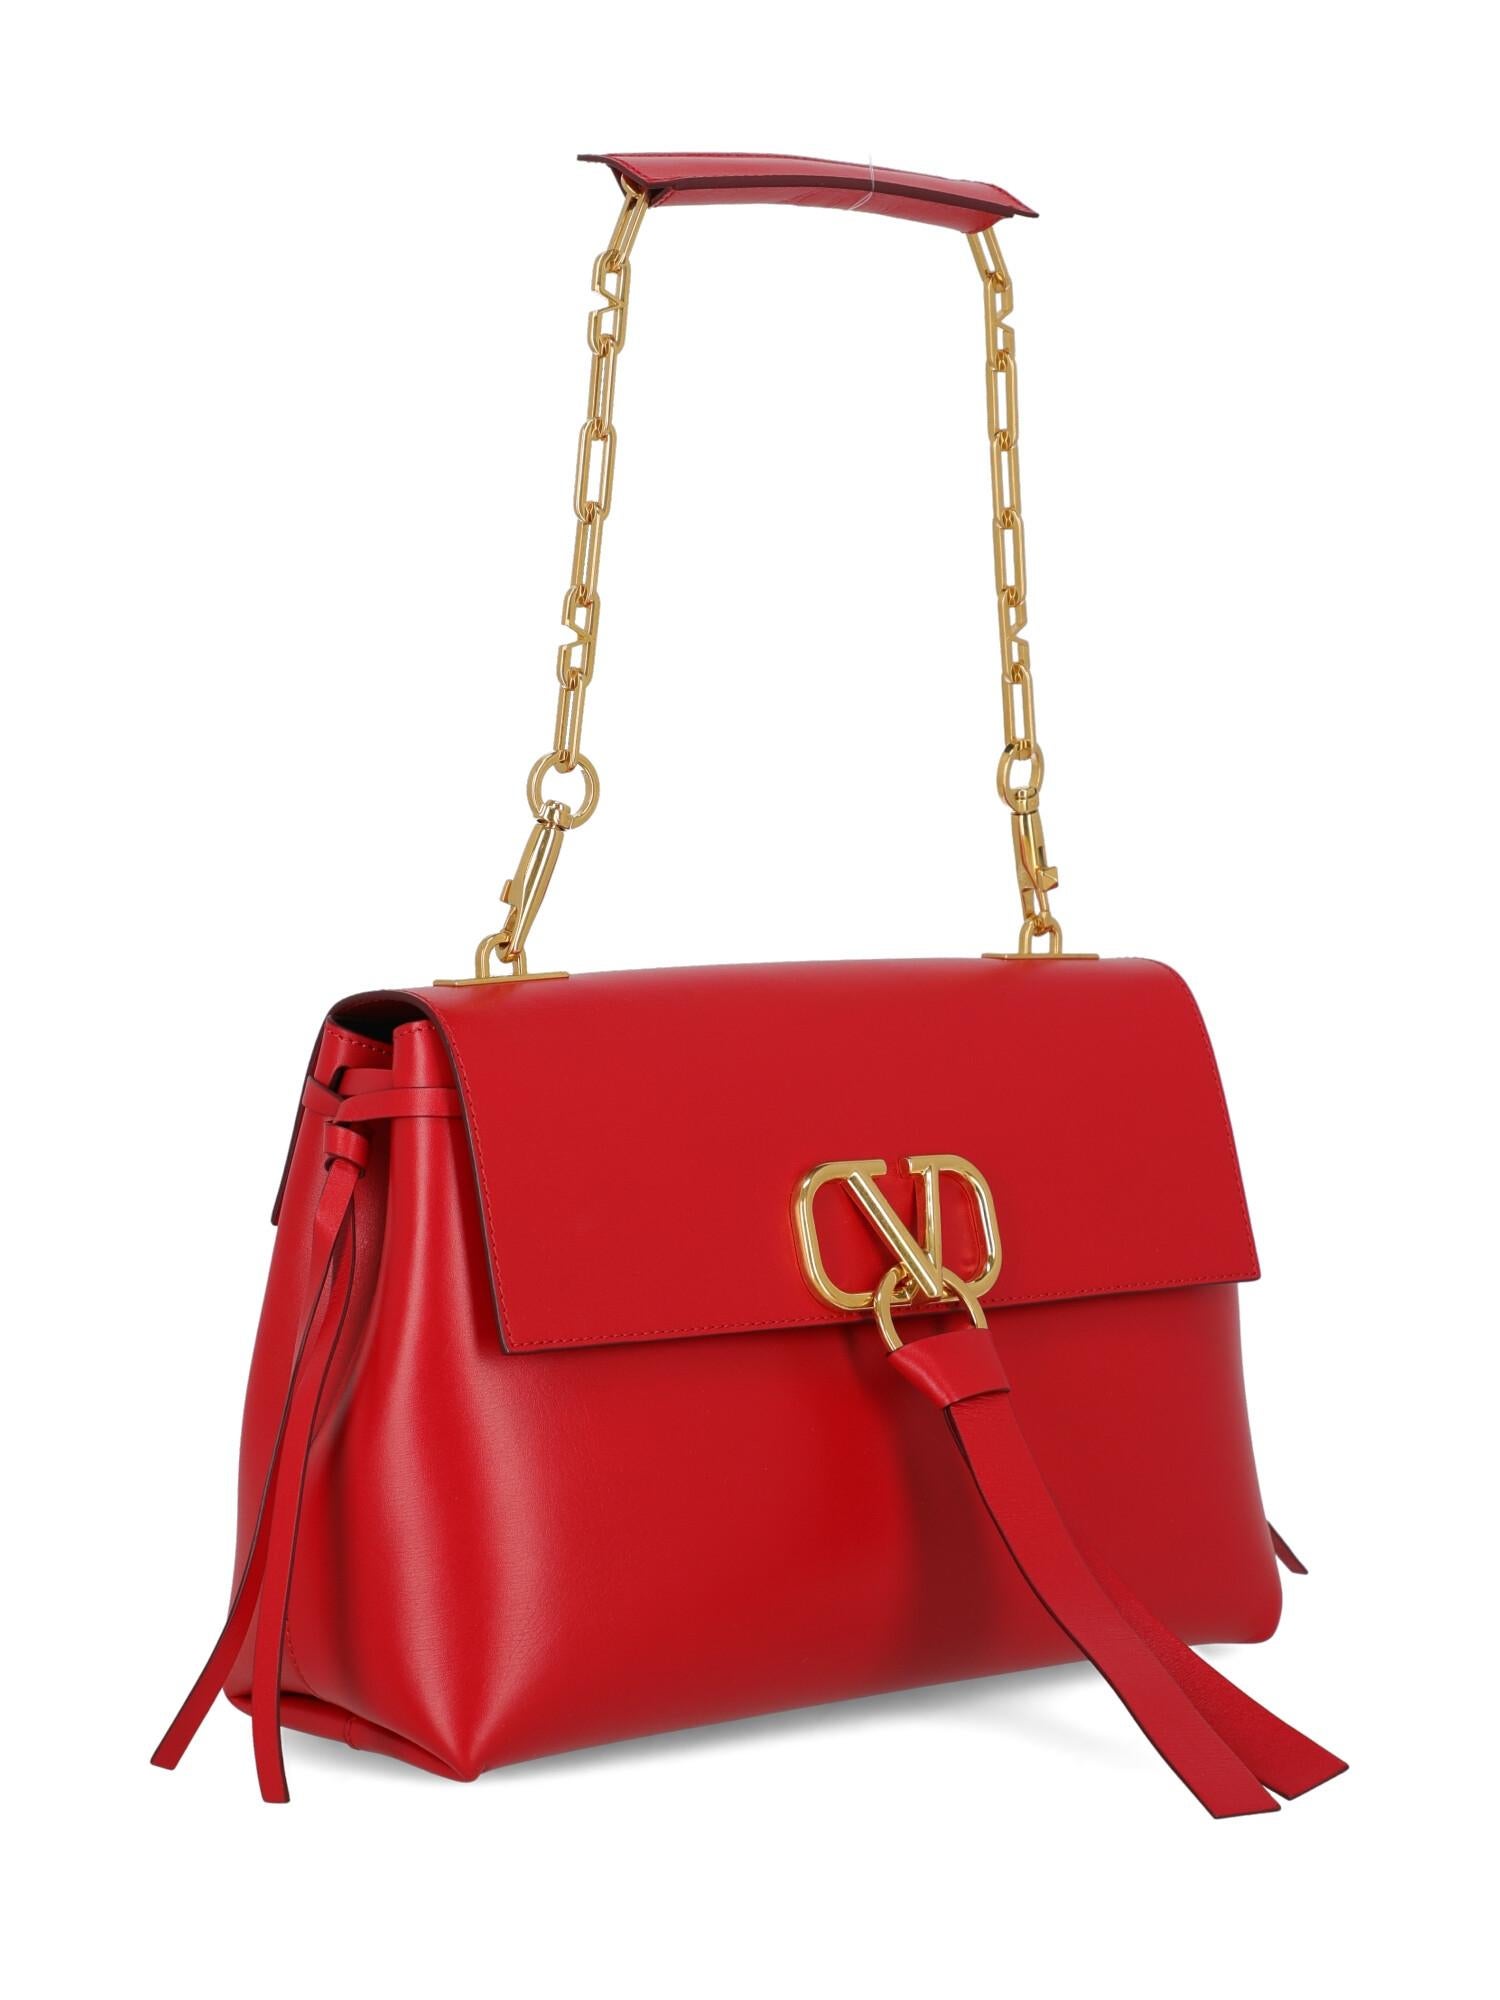 Valentino Woman Shoulder bag VRing Red Leather In Excellent Condition For Sale In Milan, IT